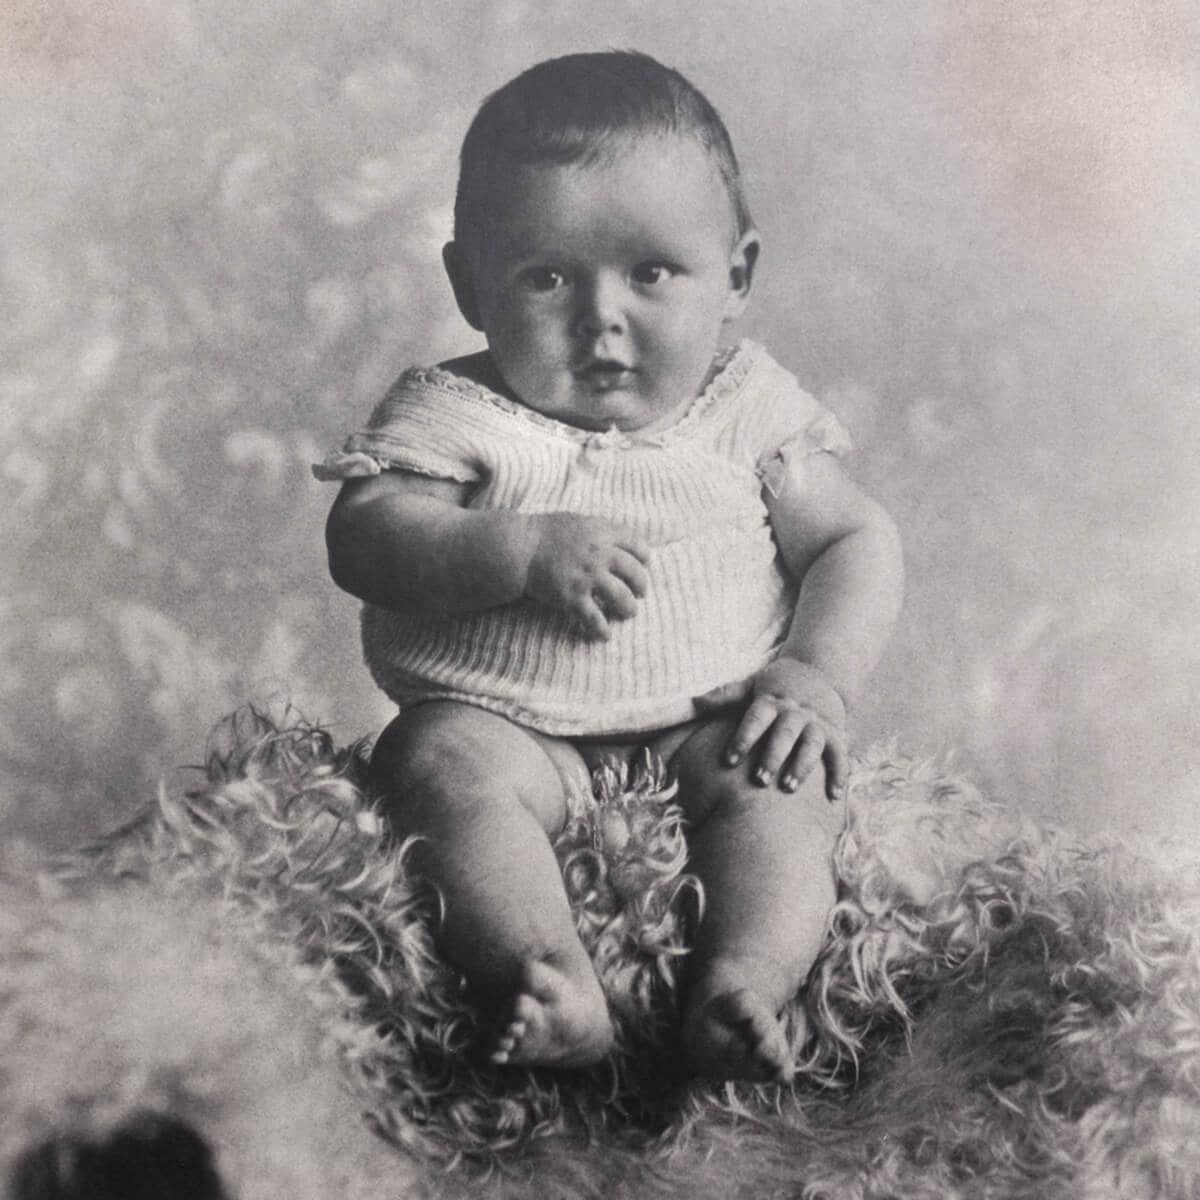 Black and white image of Harry Winston as a baby